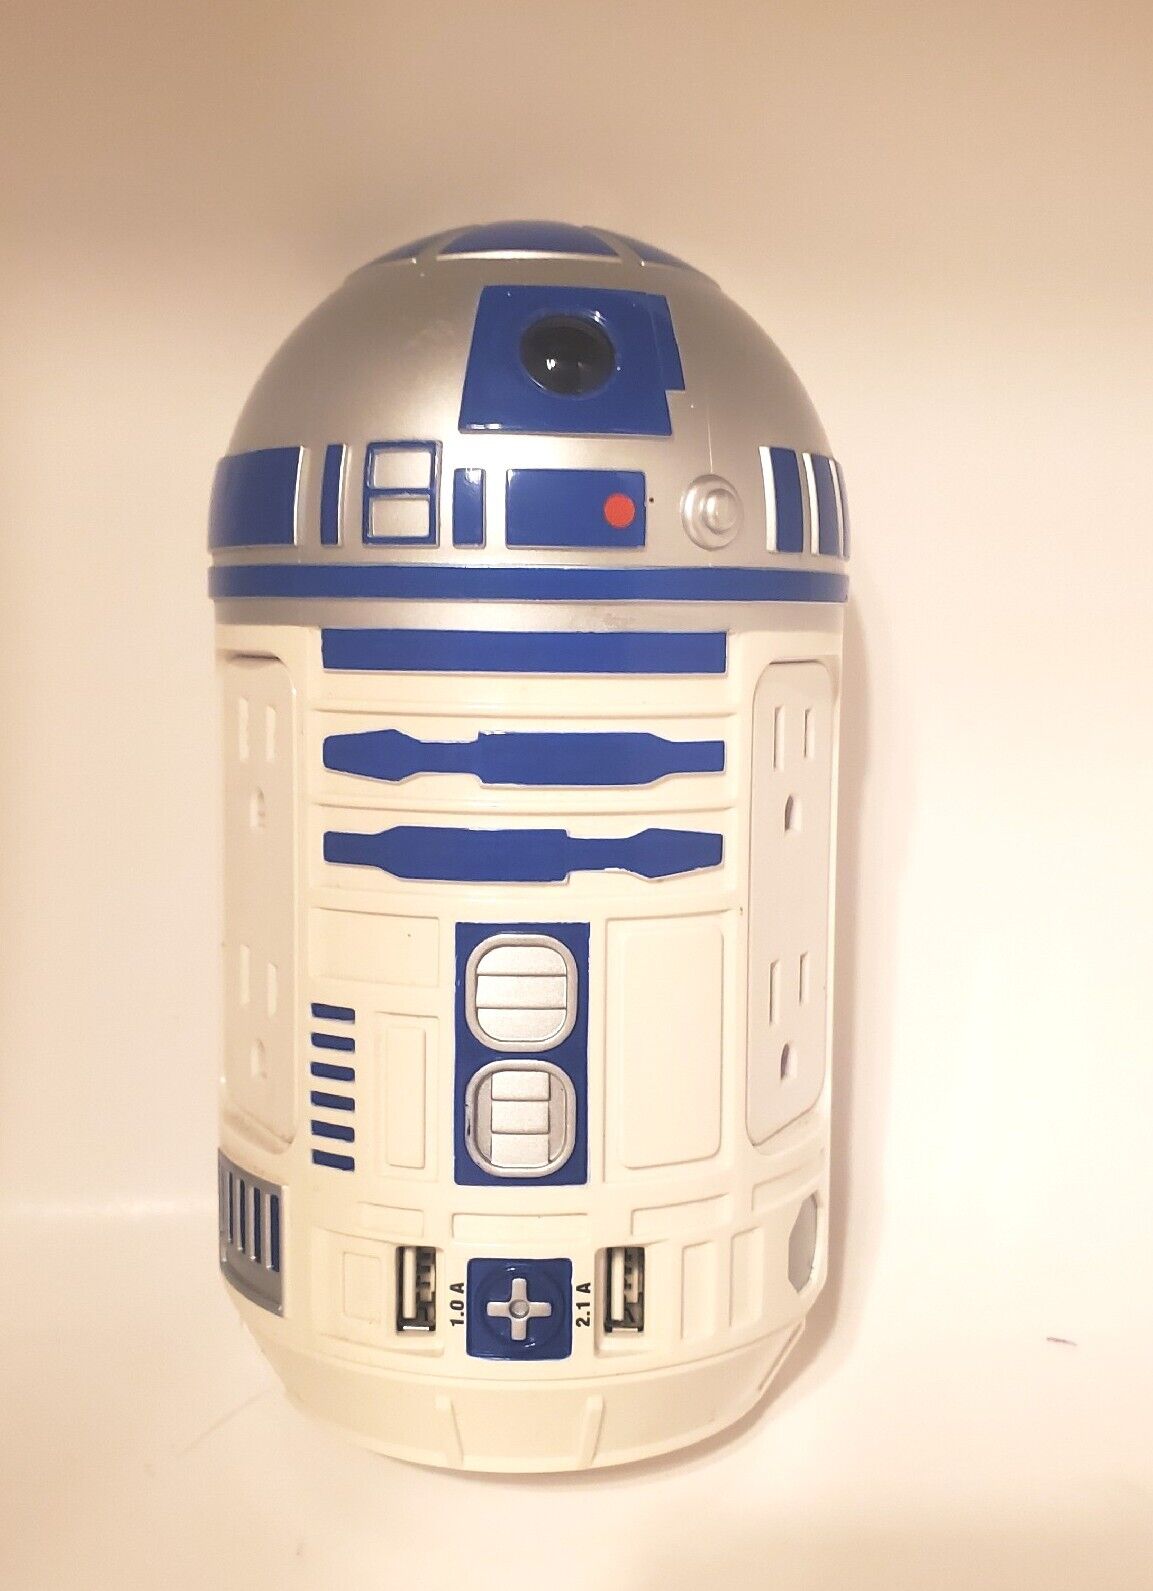 Star Wars R2-D2 Wall Charger 2 USB Ports 4 Outlets Works